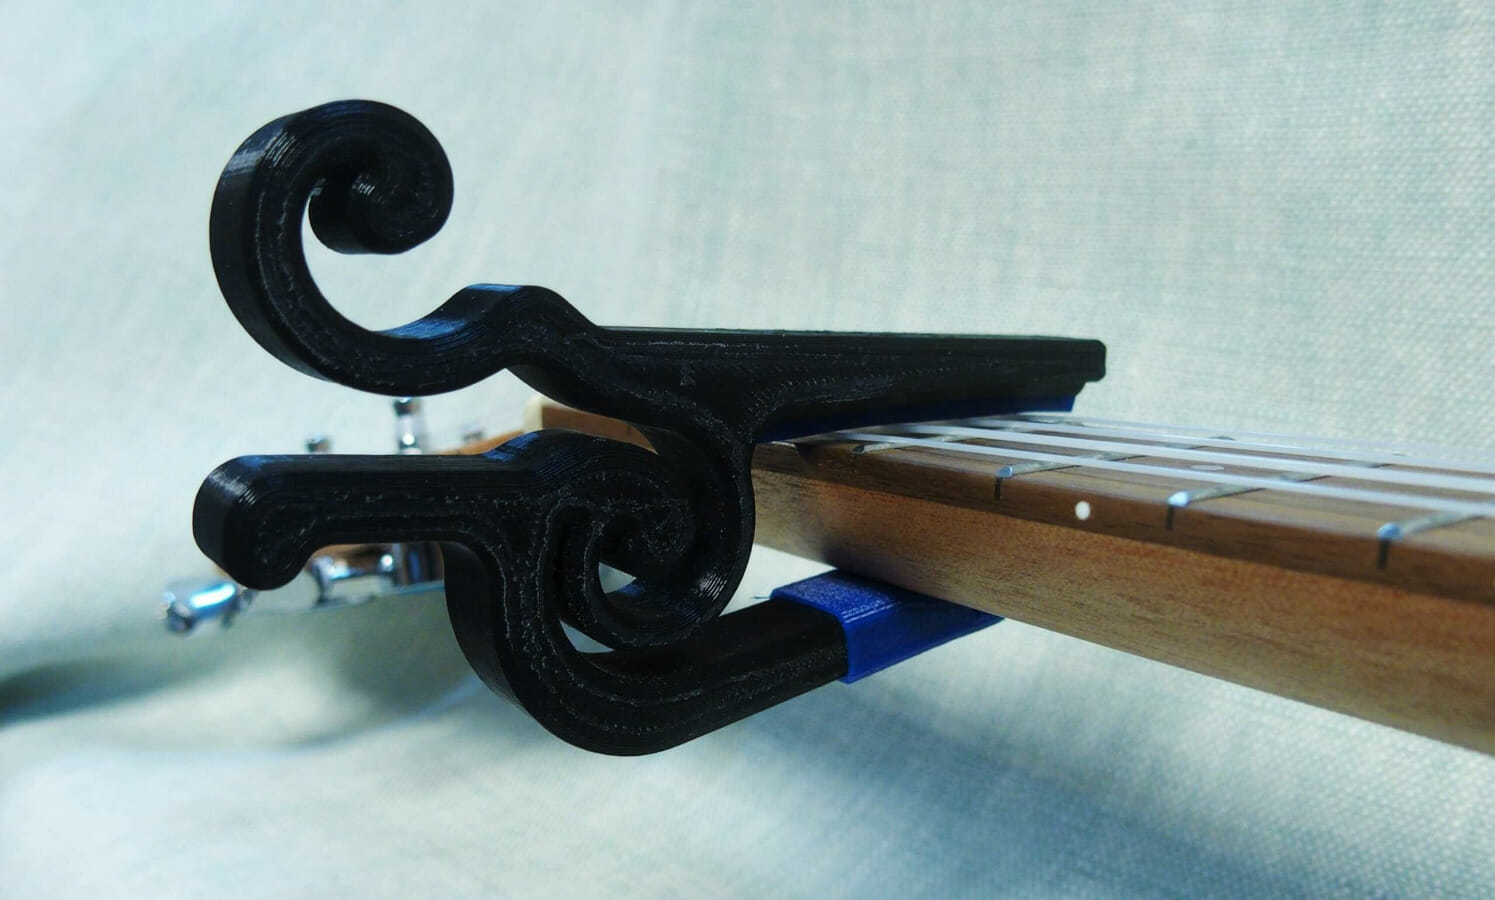 Photo of a 3D printed capo, clamped onto the neck of a ukulele. The capo is black plastic, with a spiraled hinge and matching terminal on the fretboard-side jaw.